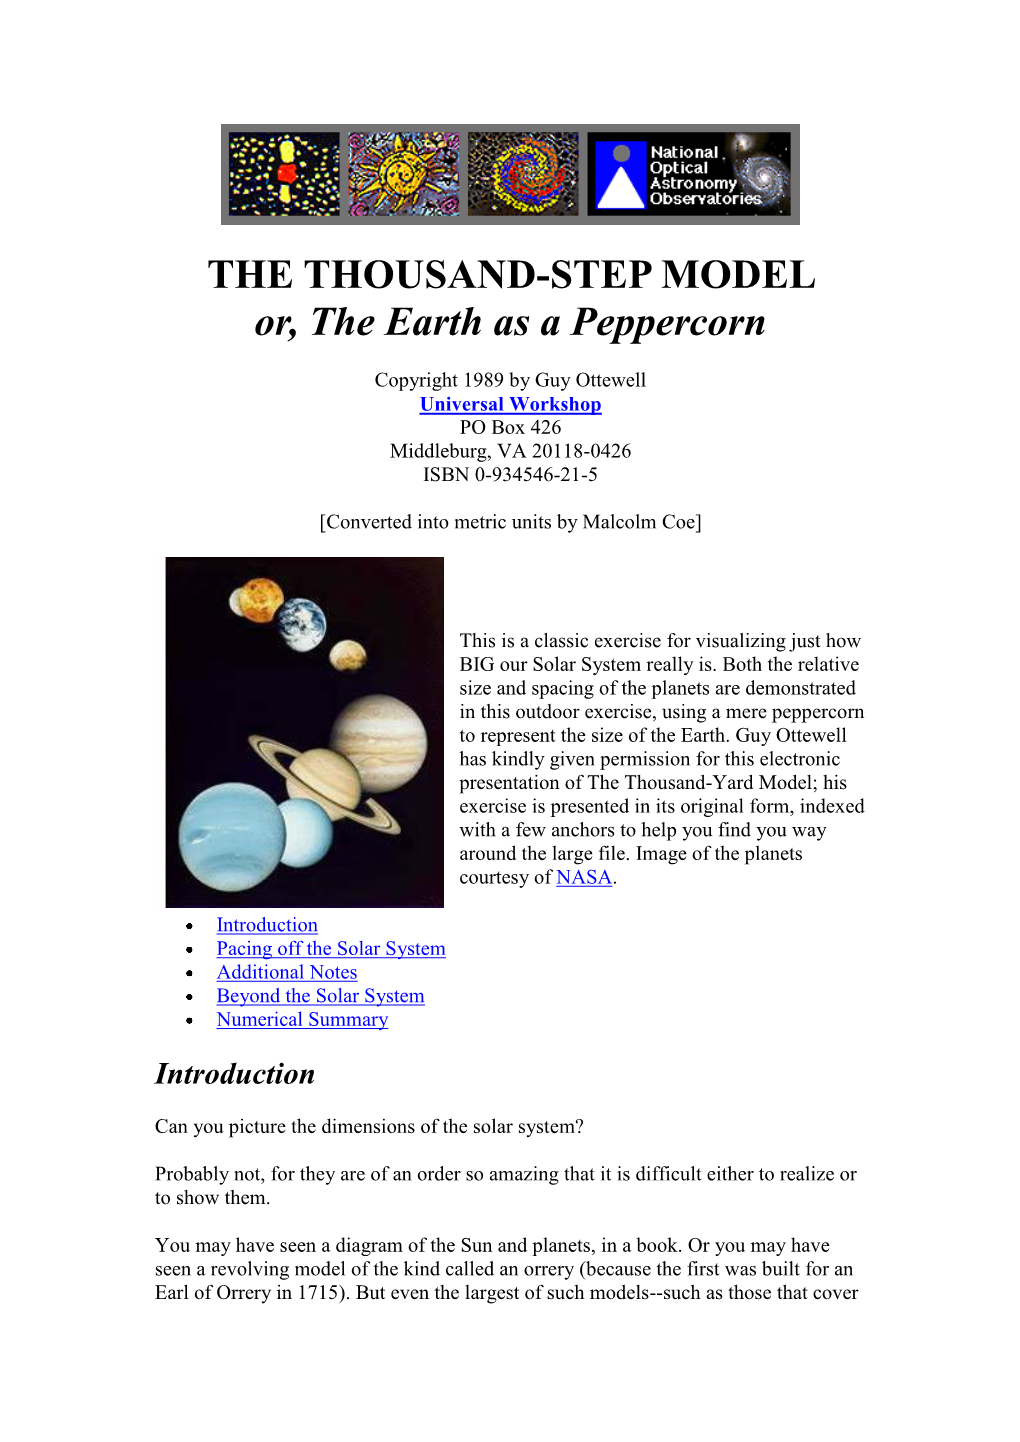 THE THOUSAND-STEP MODEL Or, the Earth As a Peppercorn